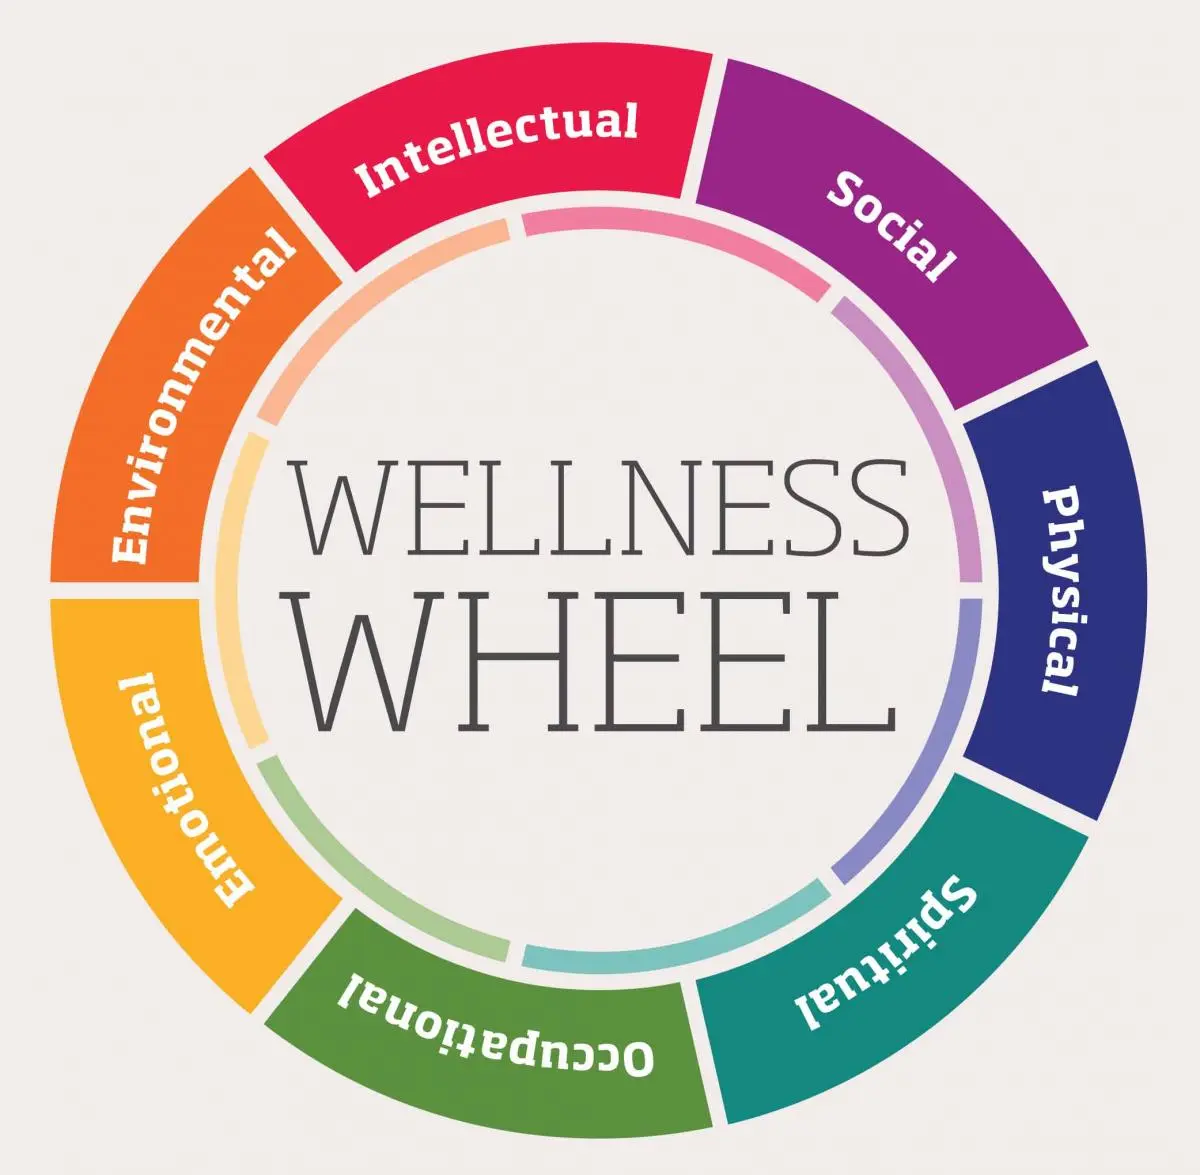 Illustration depicting interconnected icons representing physical, mental, emotional, and social wellbeing, emphasising the importance of holistic wellness in the workplace